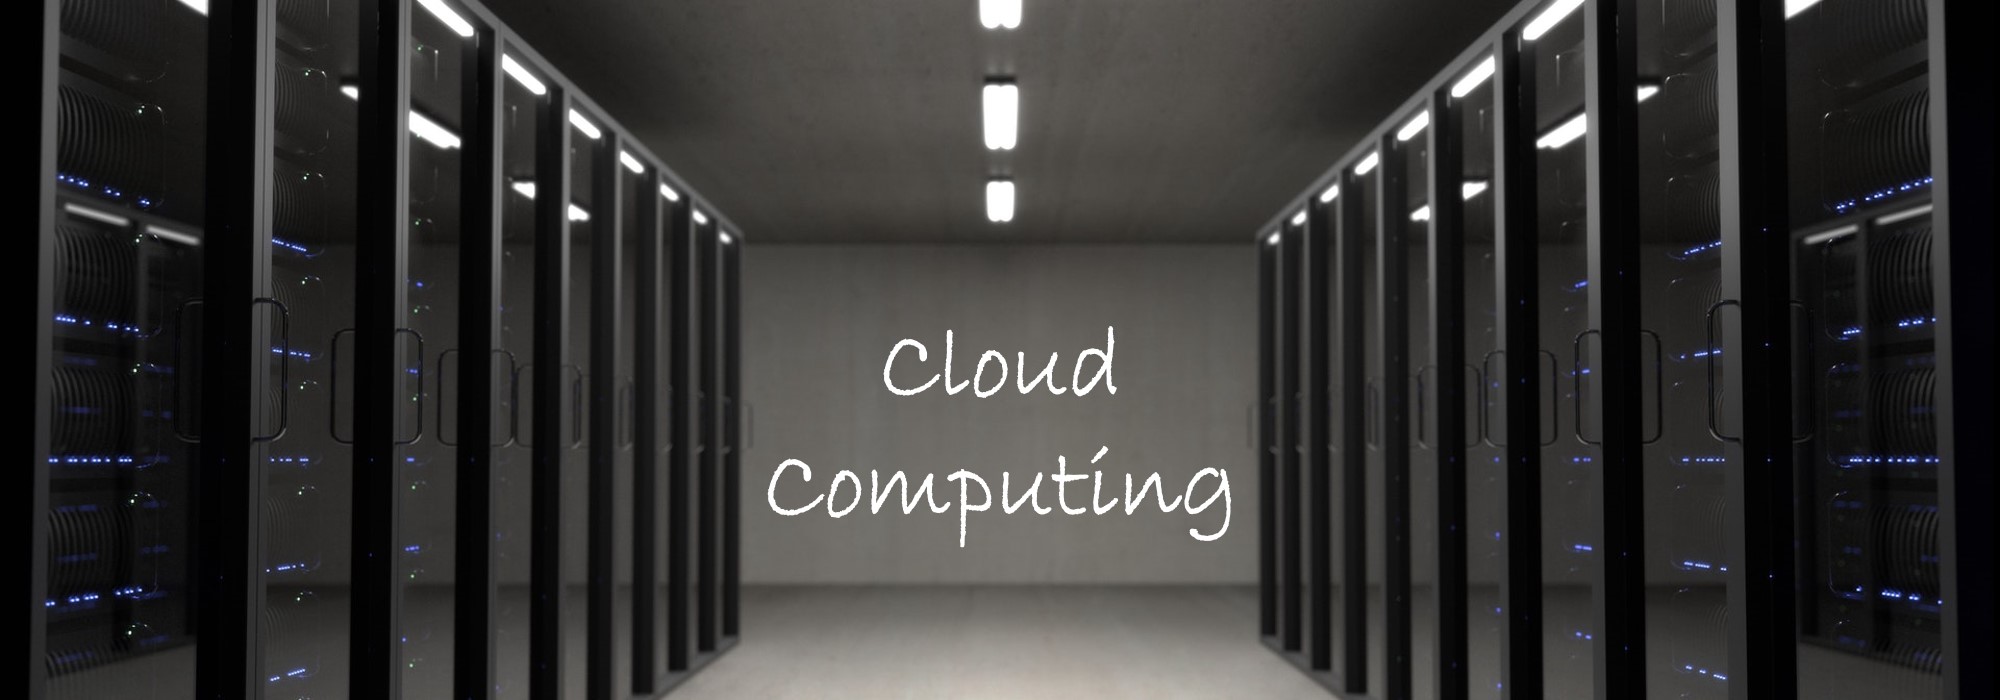 Online Cloud Computing Fundamental, Basic Course Certification India